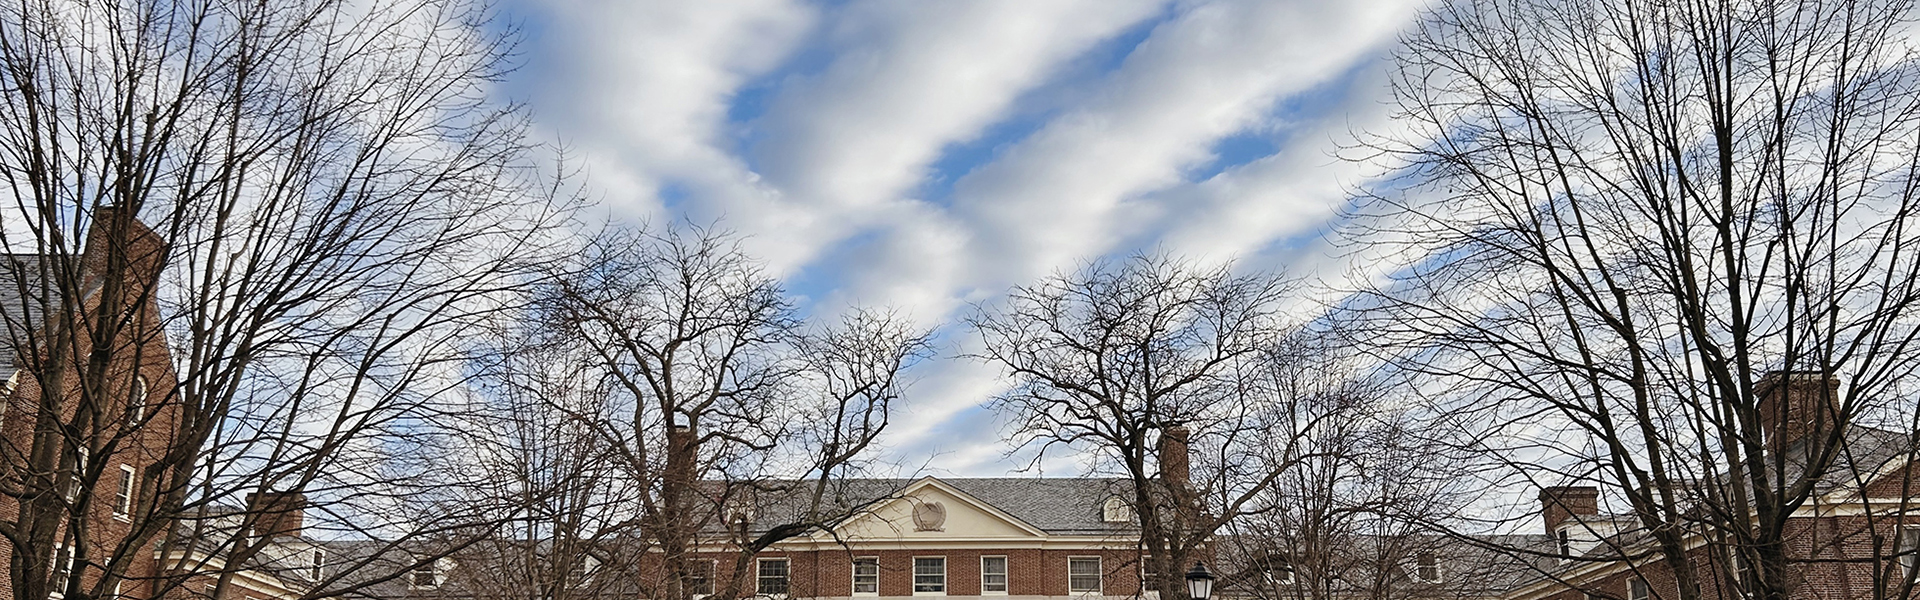 Souza - Cloud Formations on Campus